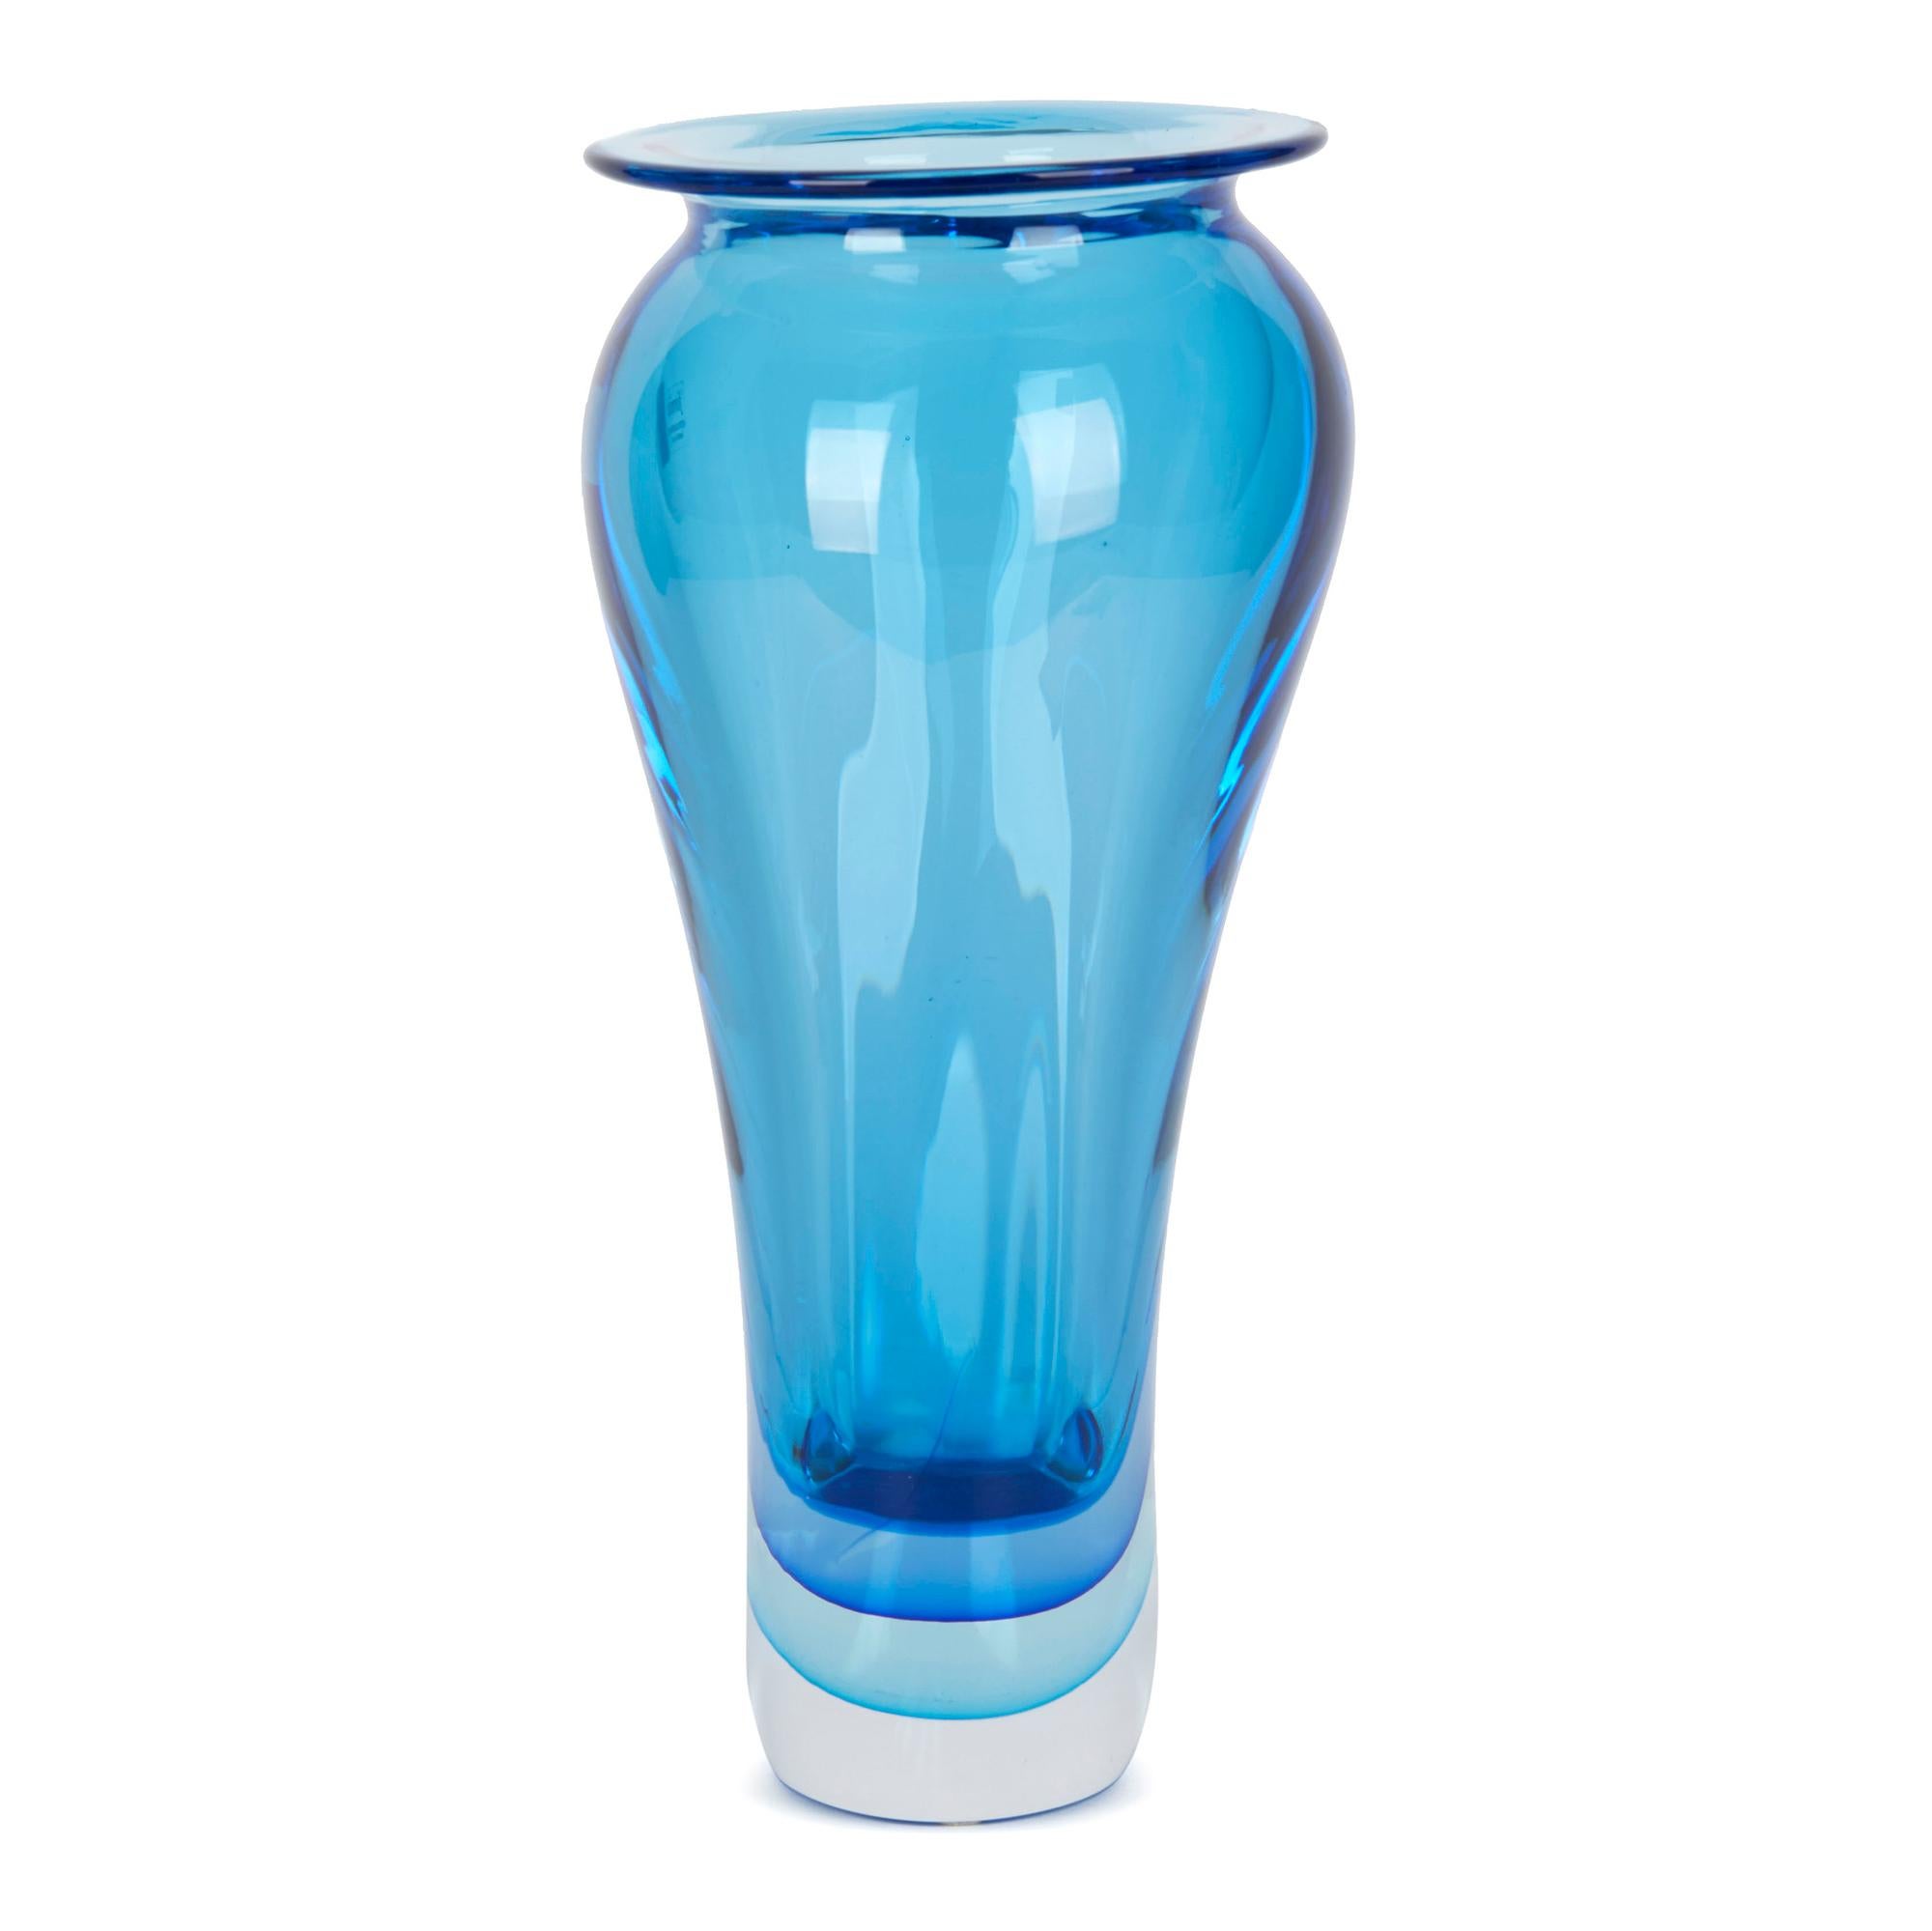 An exceptional and large Italian Murano blue sommerso art glass vase by Renowned glass makers Formia Vetri Di Murano. The heavily made vase has a shaped body which widens at the top with a narrower oval shaped fold back rim. The blue glass body has